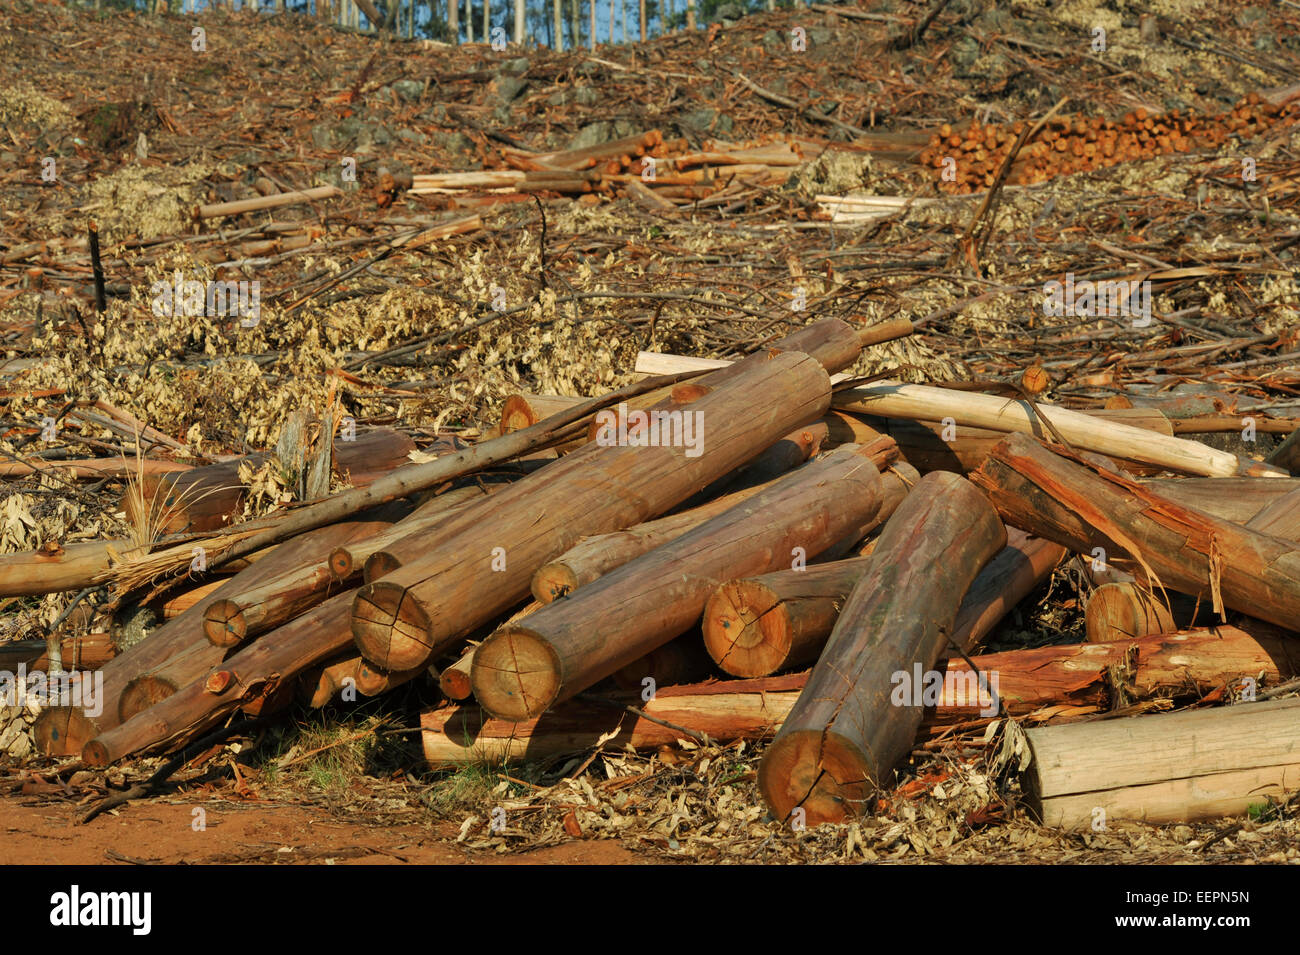 Nelspruit, Mpumalanga, South Africa, forestry industry, wood log pile, timber harvest, farming, landscape, tree, heap Stock Photo